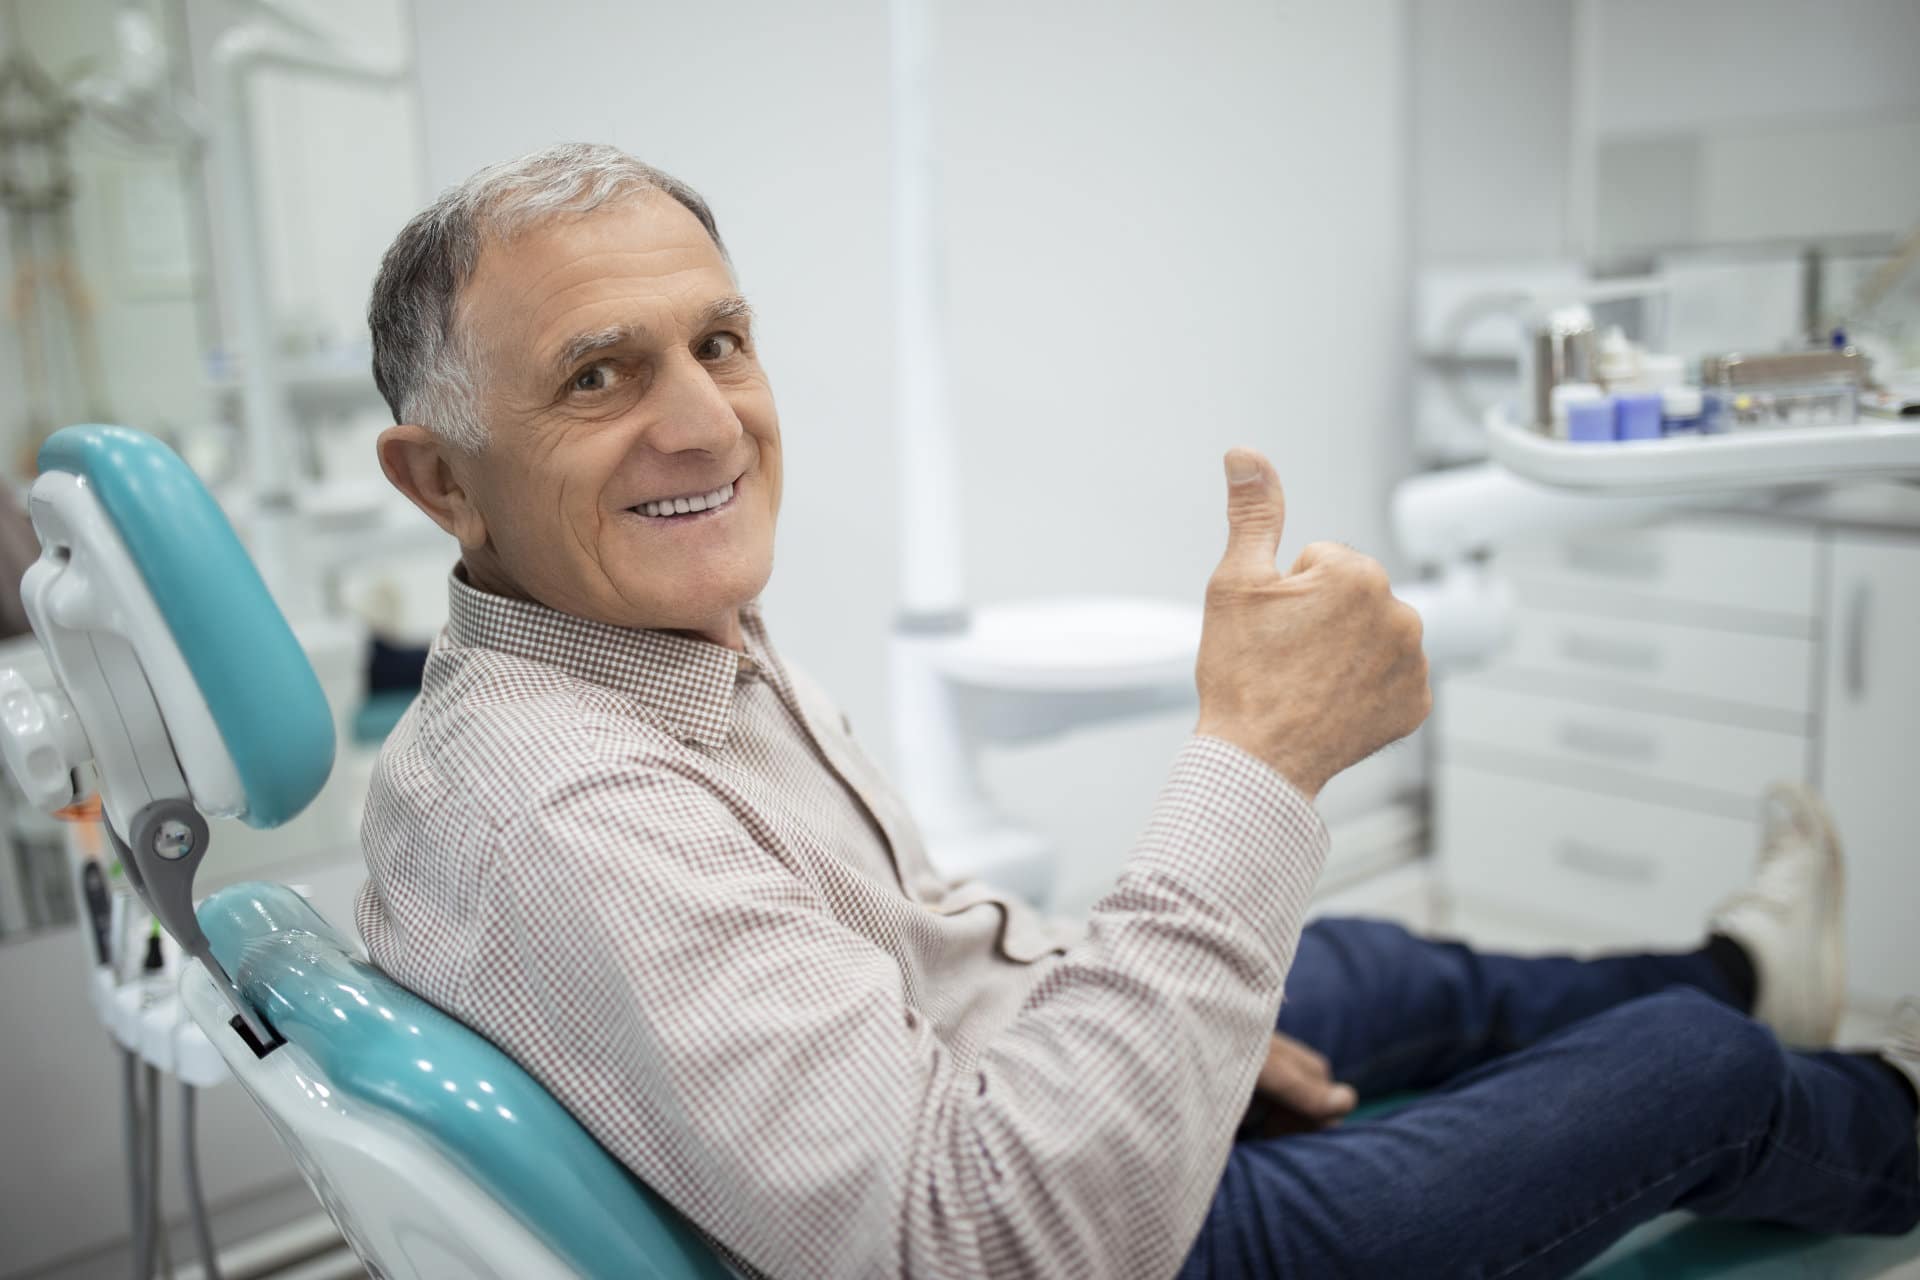 Reclaim your smile with our reliable dental implants, designed to restore function, health, and aesthetics.